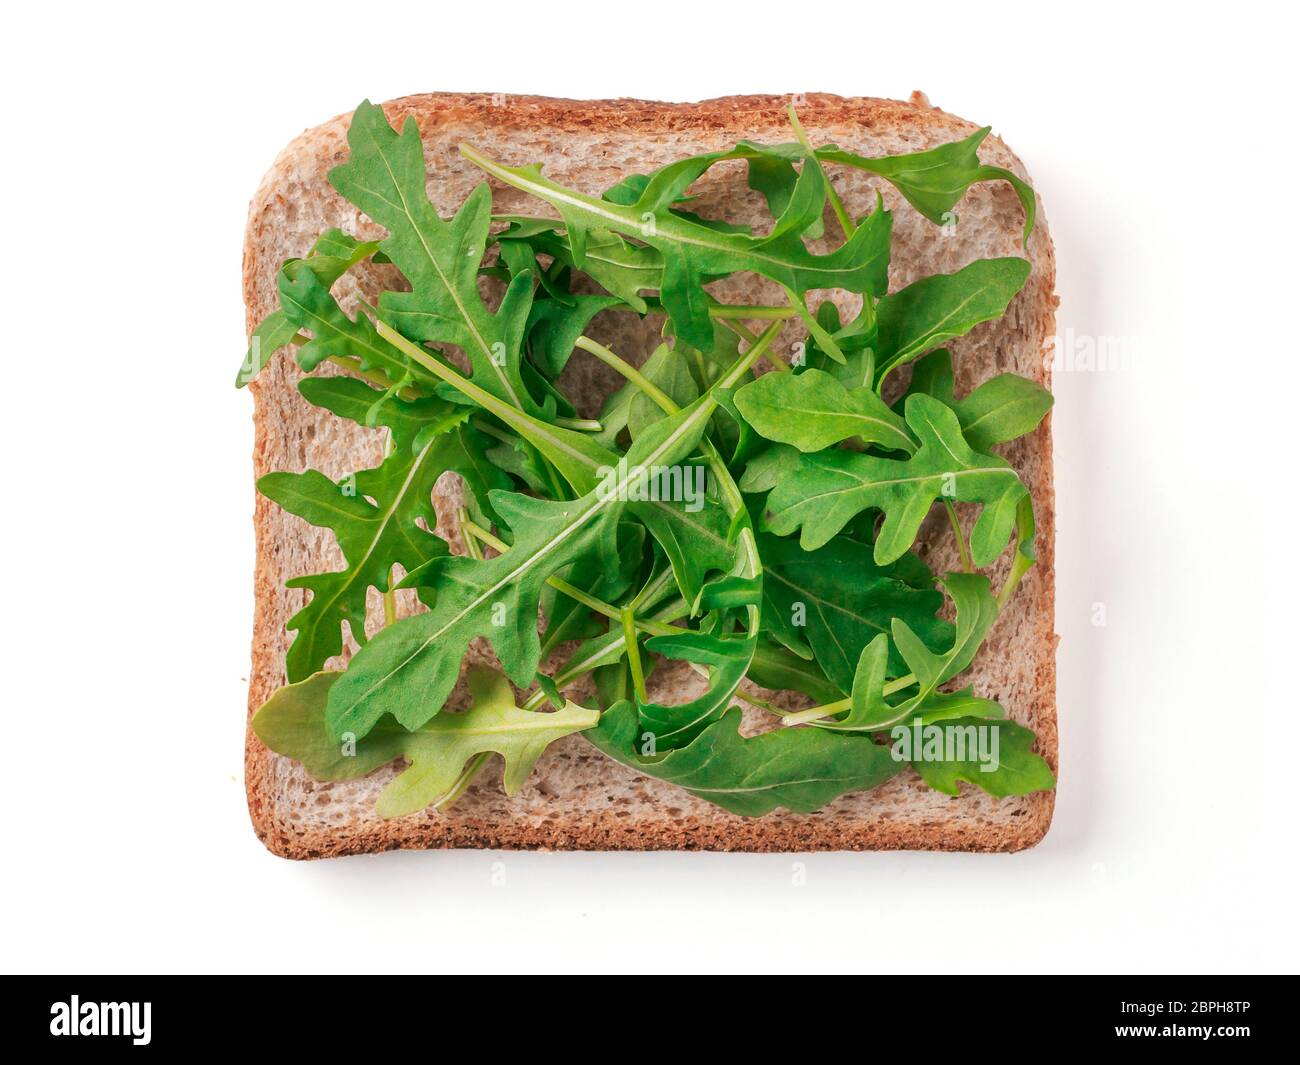 Bread slice with arugula leaves isolated on white, clipping path. Slice of multigrain bread square form with green arugula leaves for toast. Image of Stock Photo